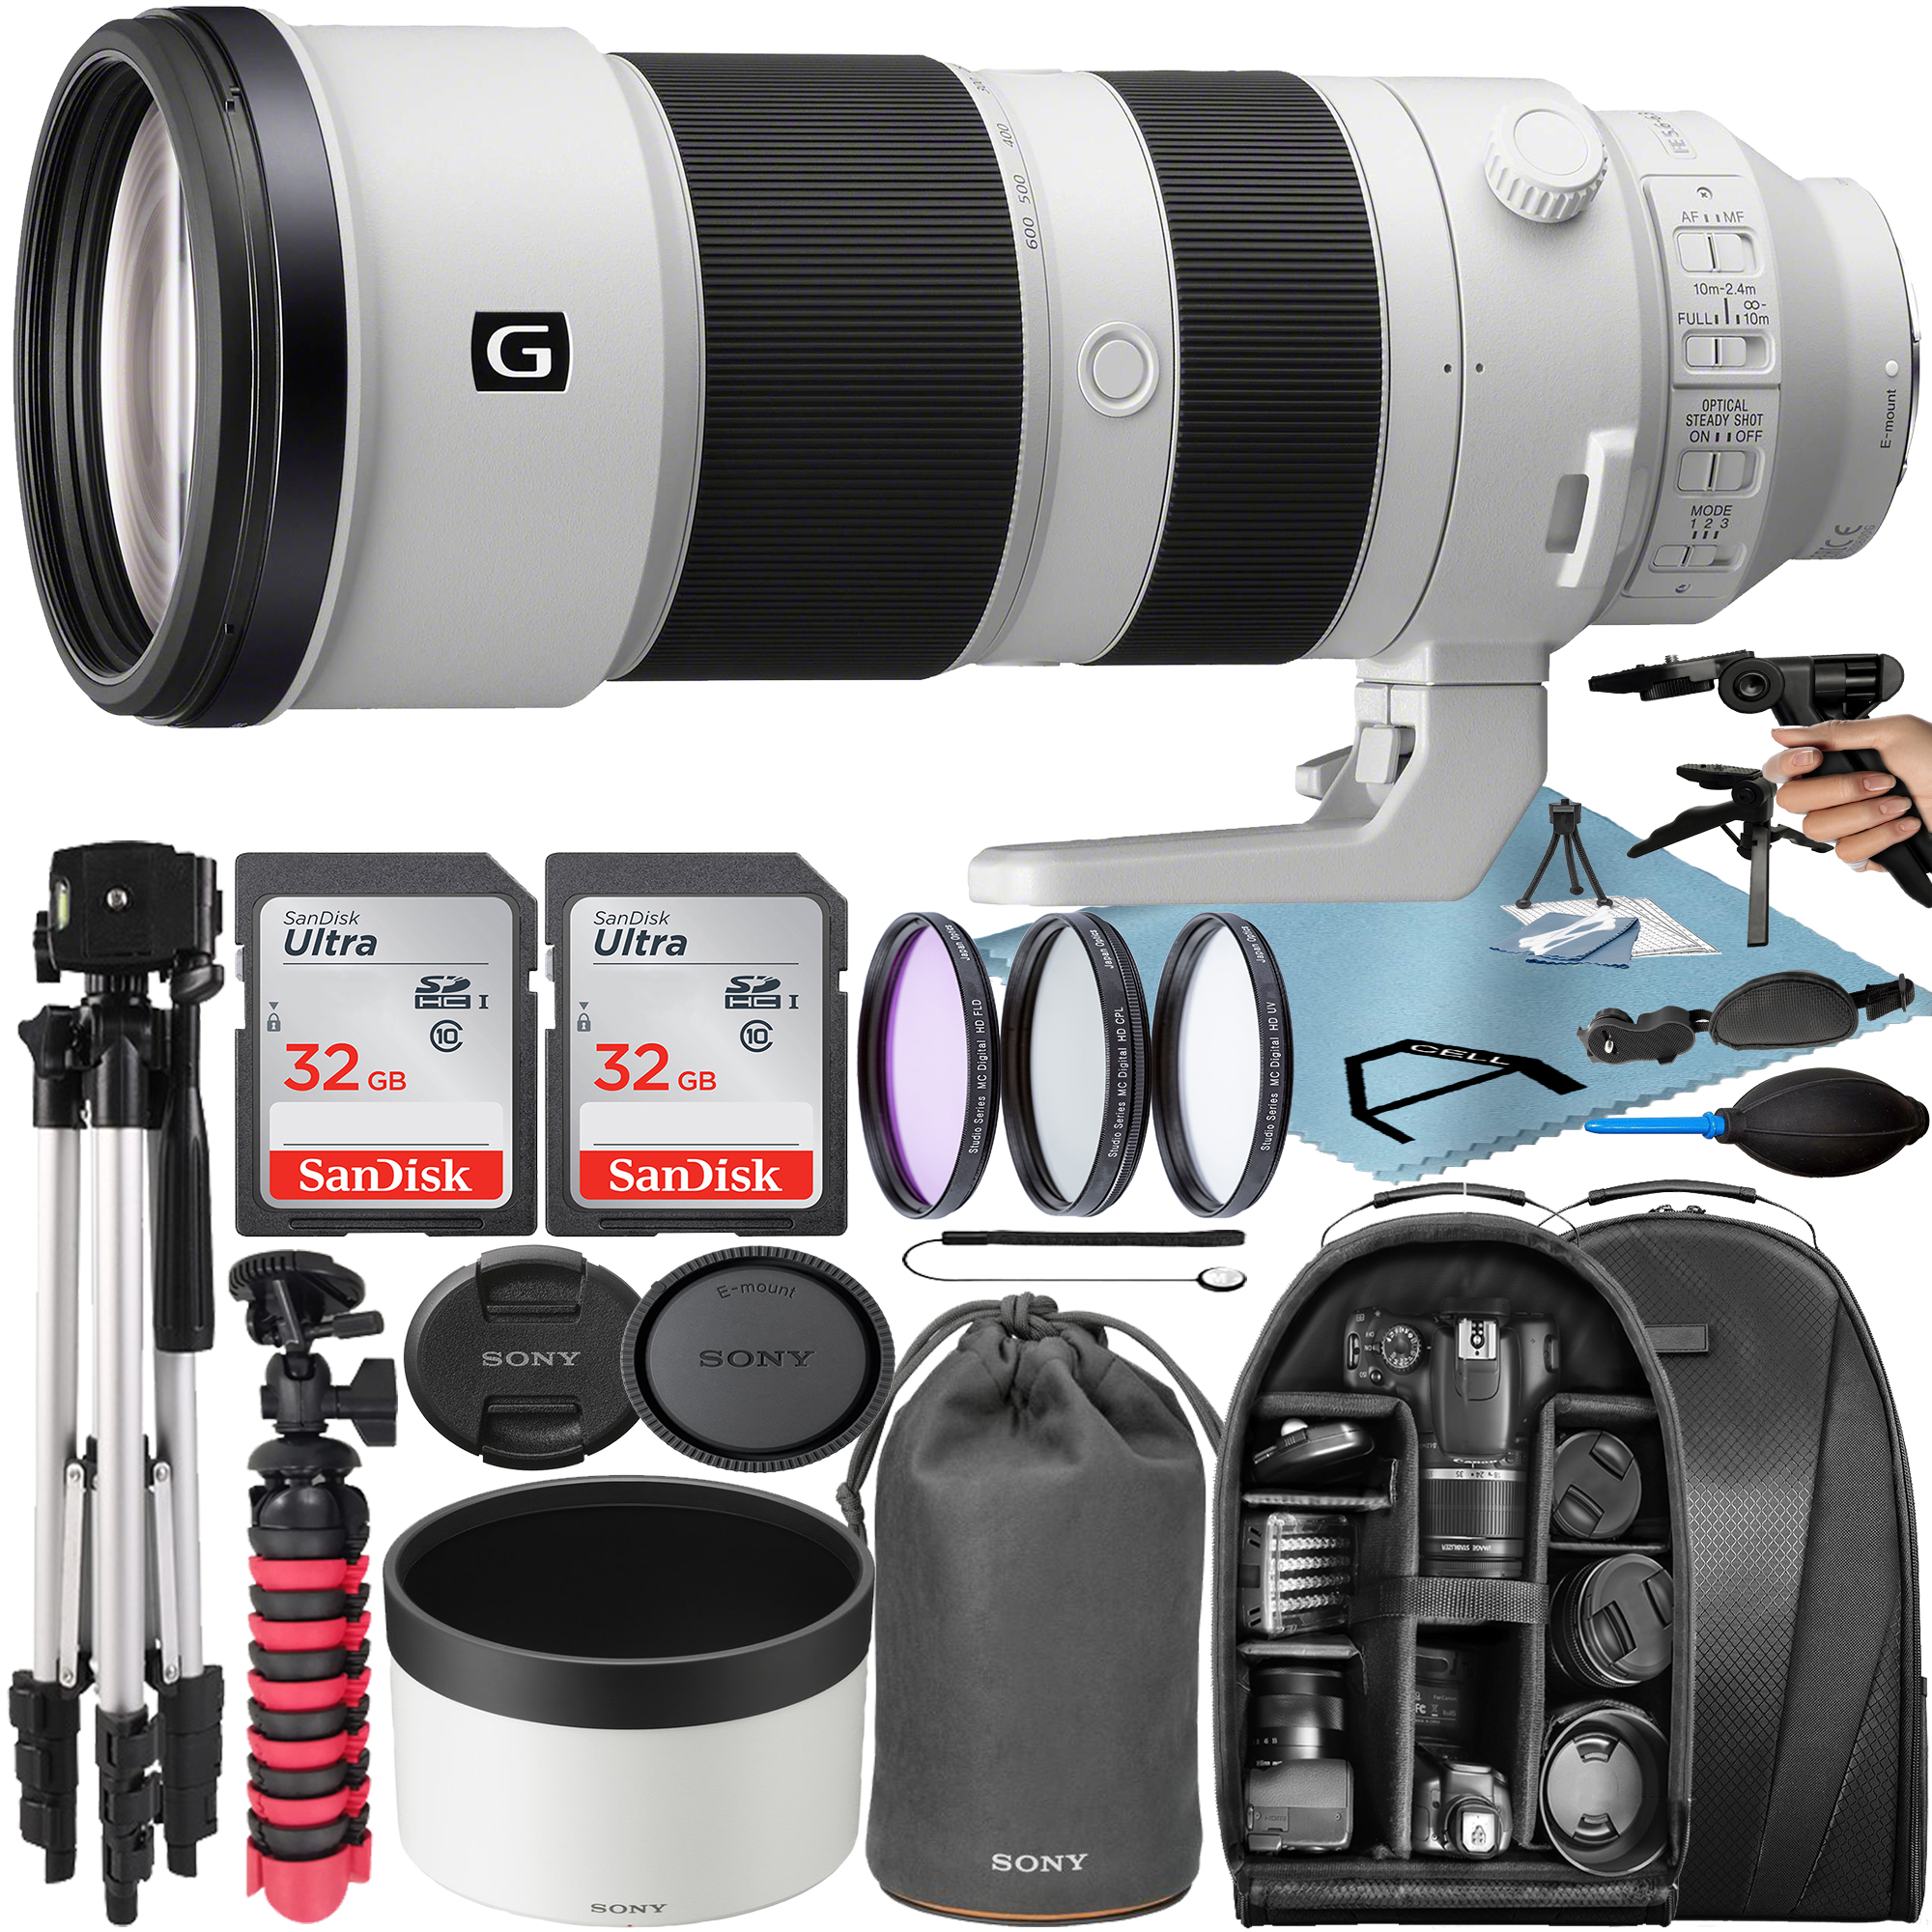 Sony FE 200-600mm F/5.6-6.3 G OSS Lens with 2 Pack 32GB SanDisk Memory Card + Tripod + Backpack + A-Cell Accessory Bundle